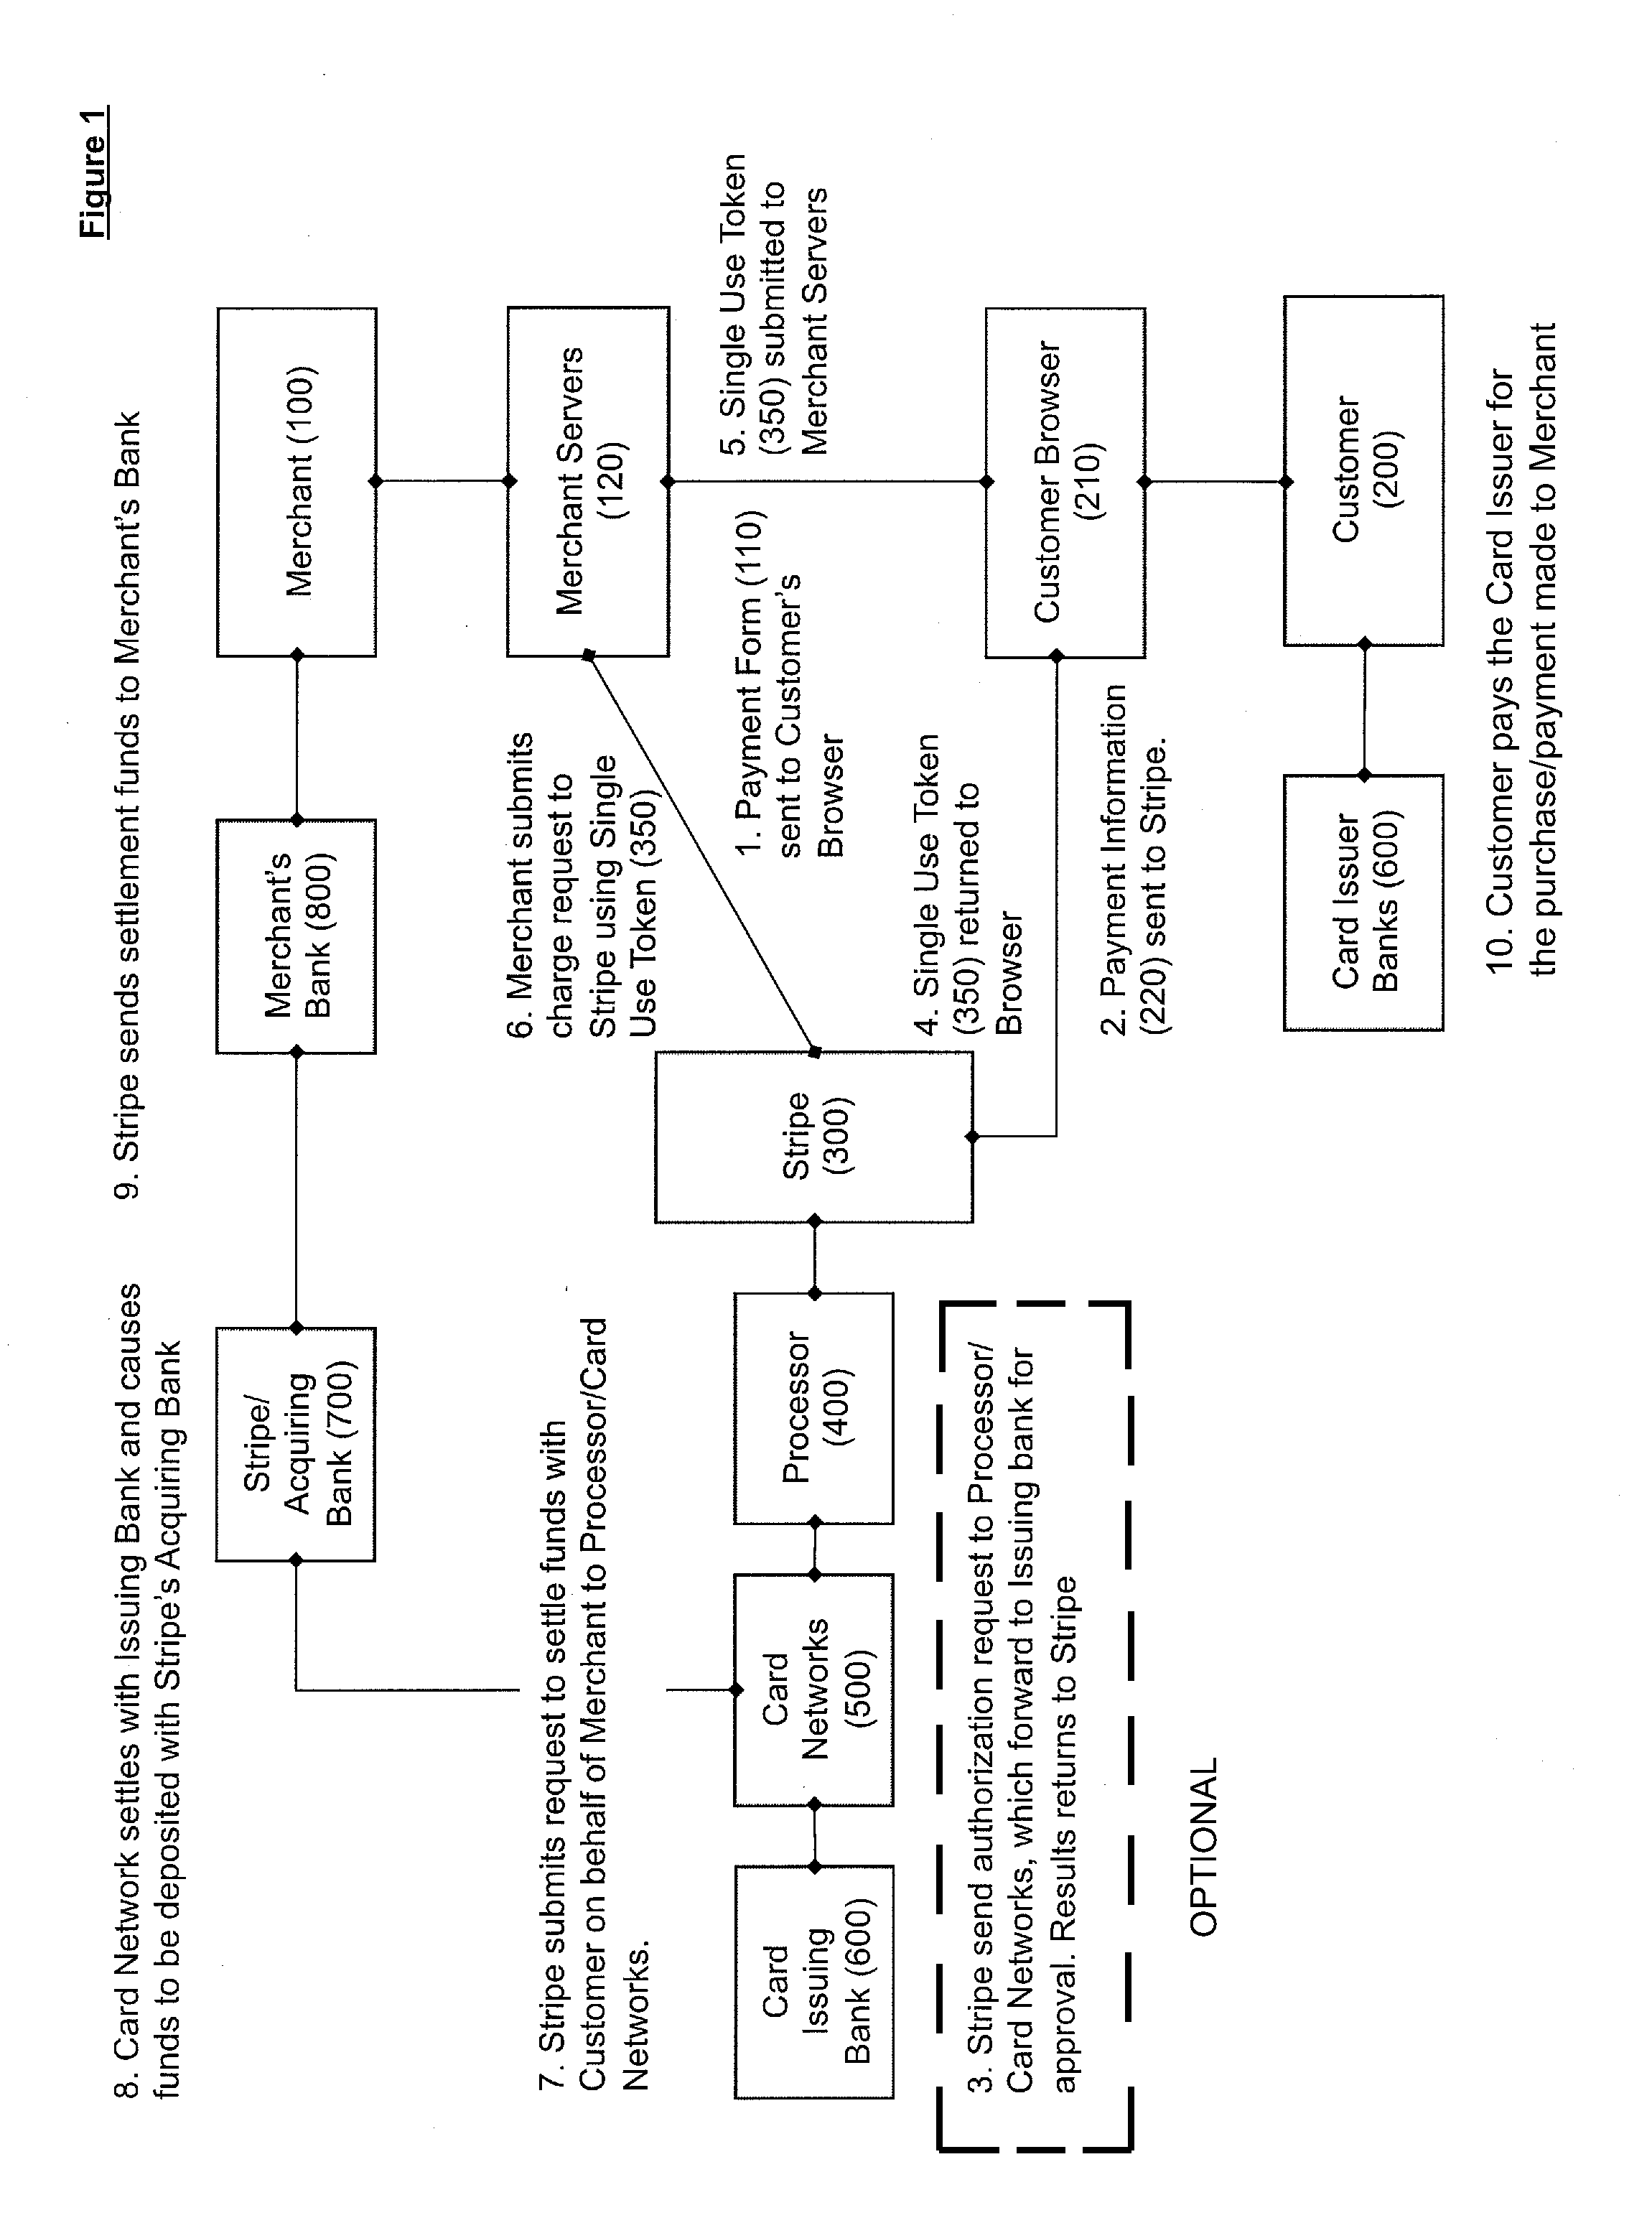 Method for conducting a transaction between a merchant site and a customer's electronic device without exposing payment information to a server-side application of the merchant site